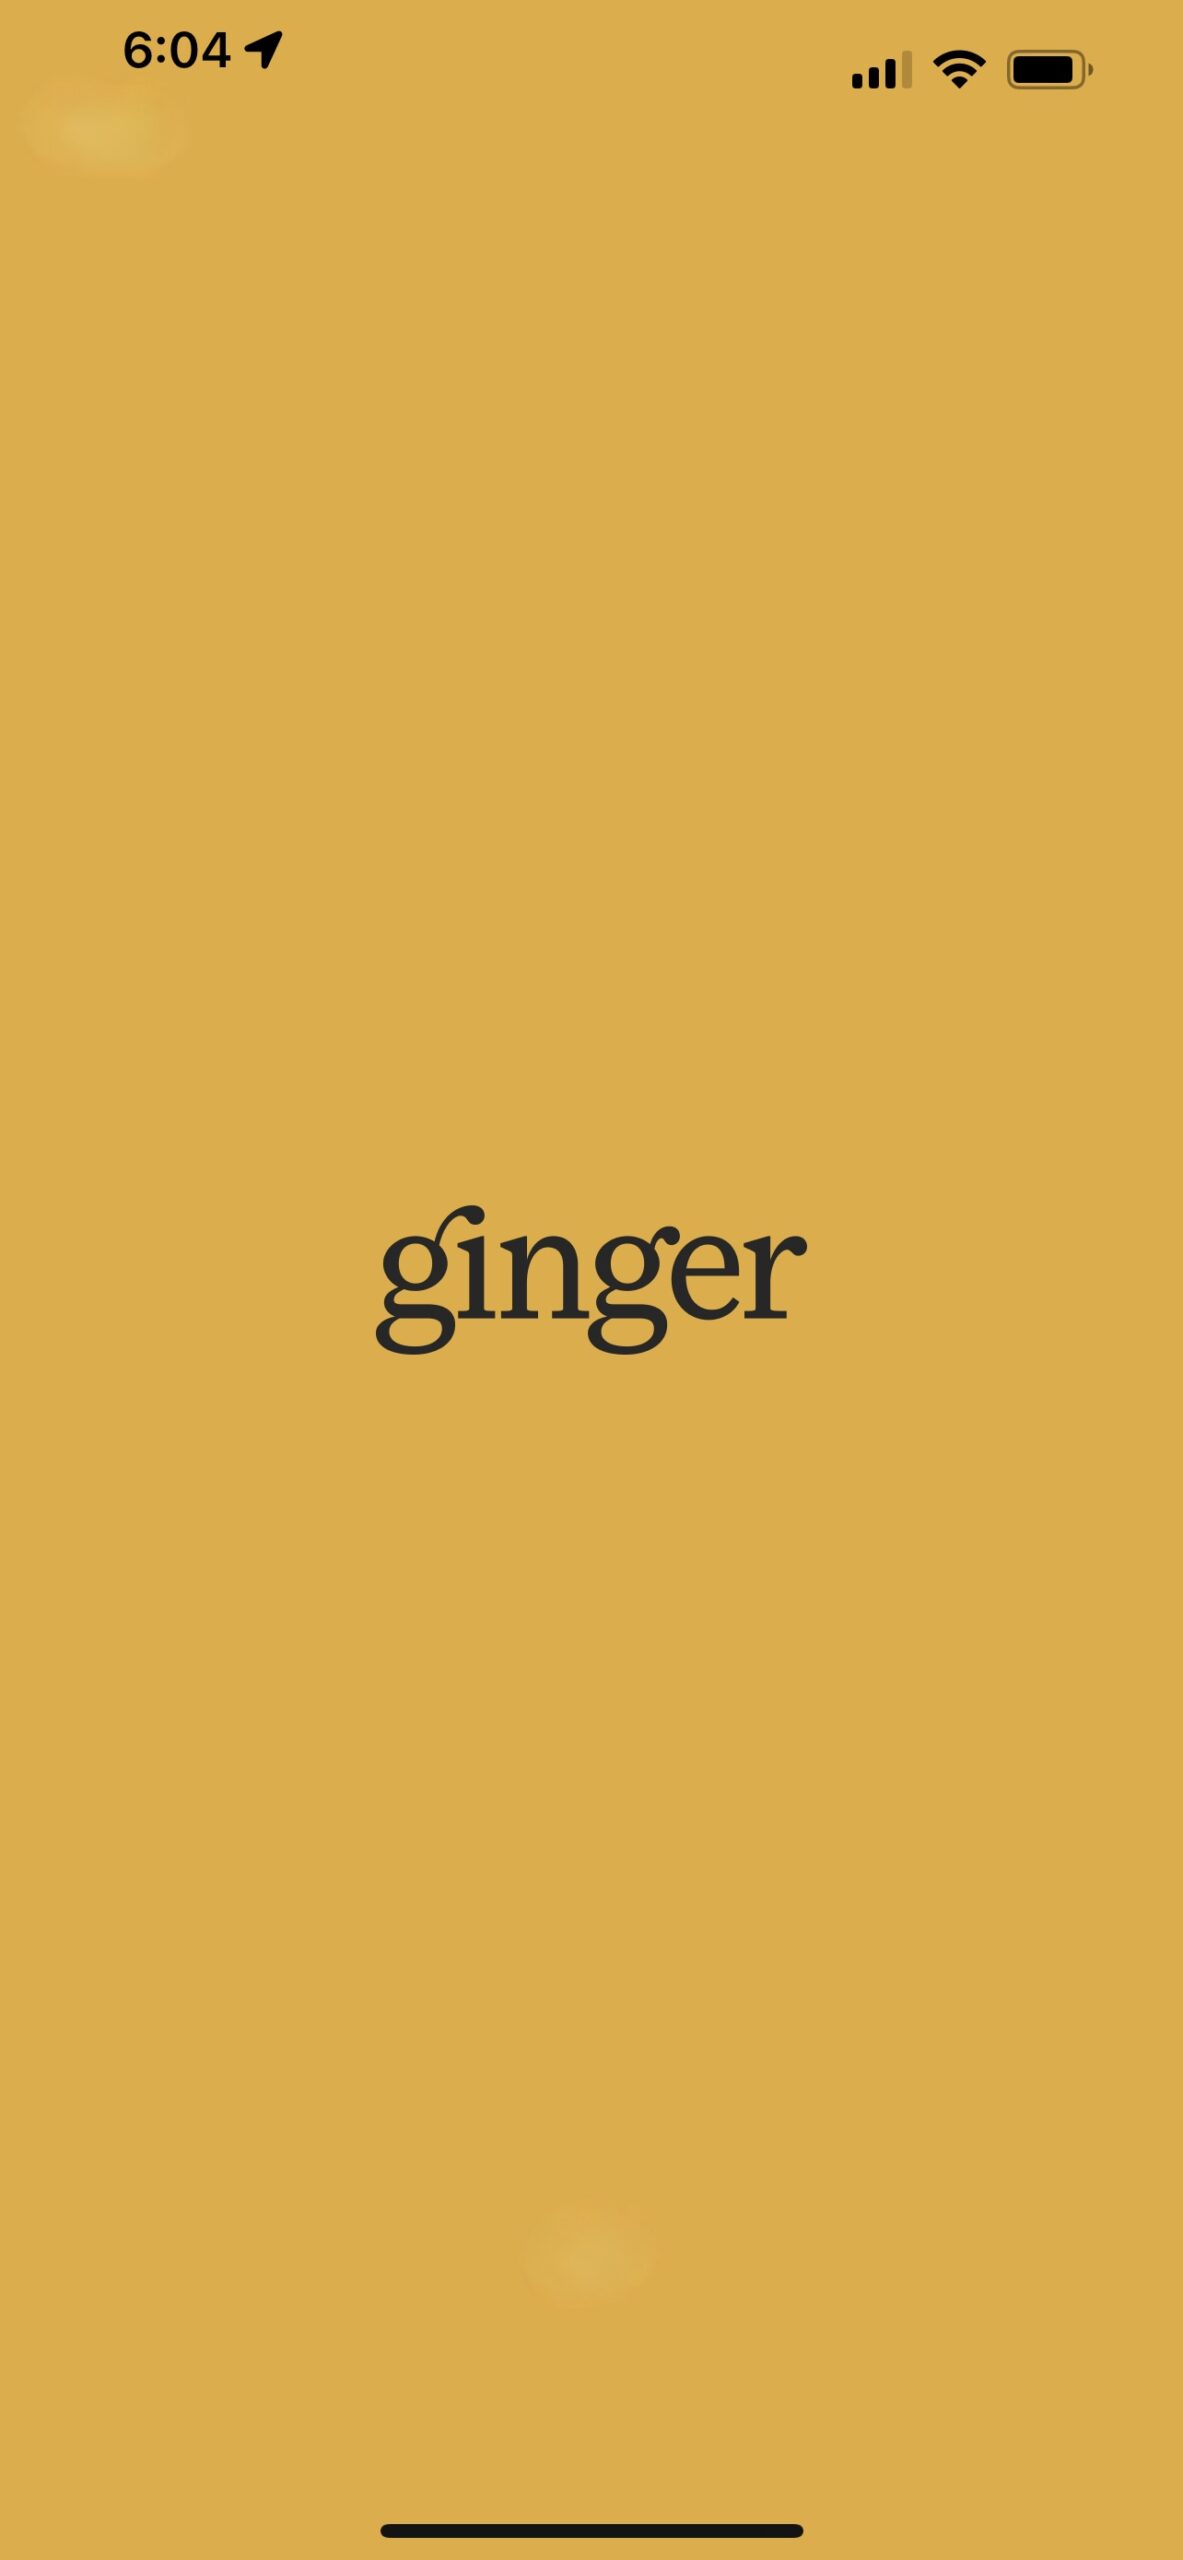 My Experience With Ginger Emotional Support App: My Honest Review